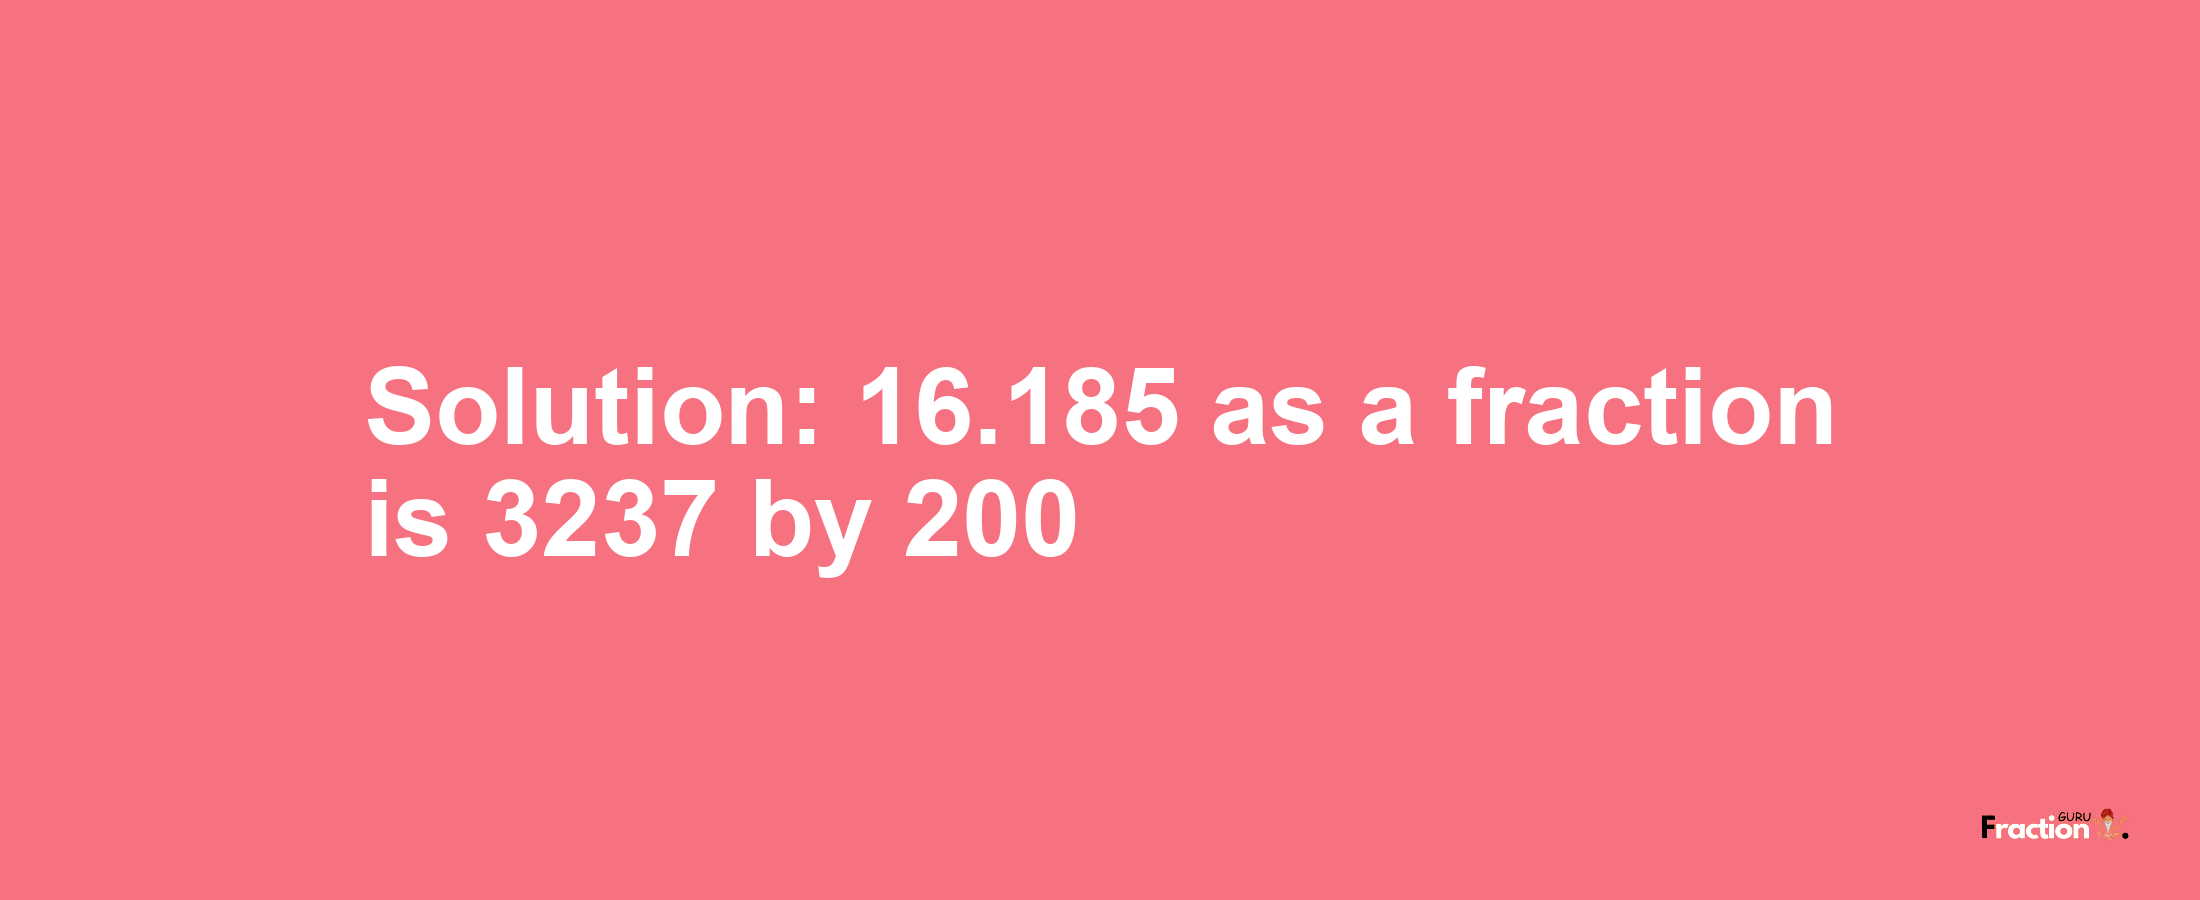 Solution:16.185 as a fraction is 3237/200